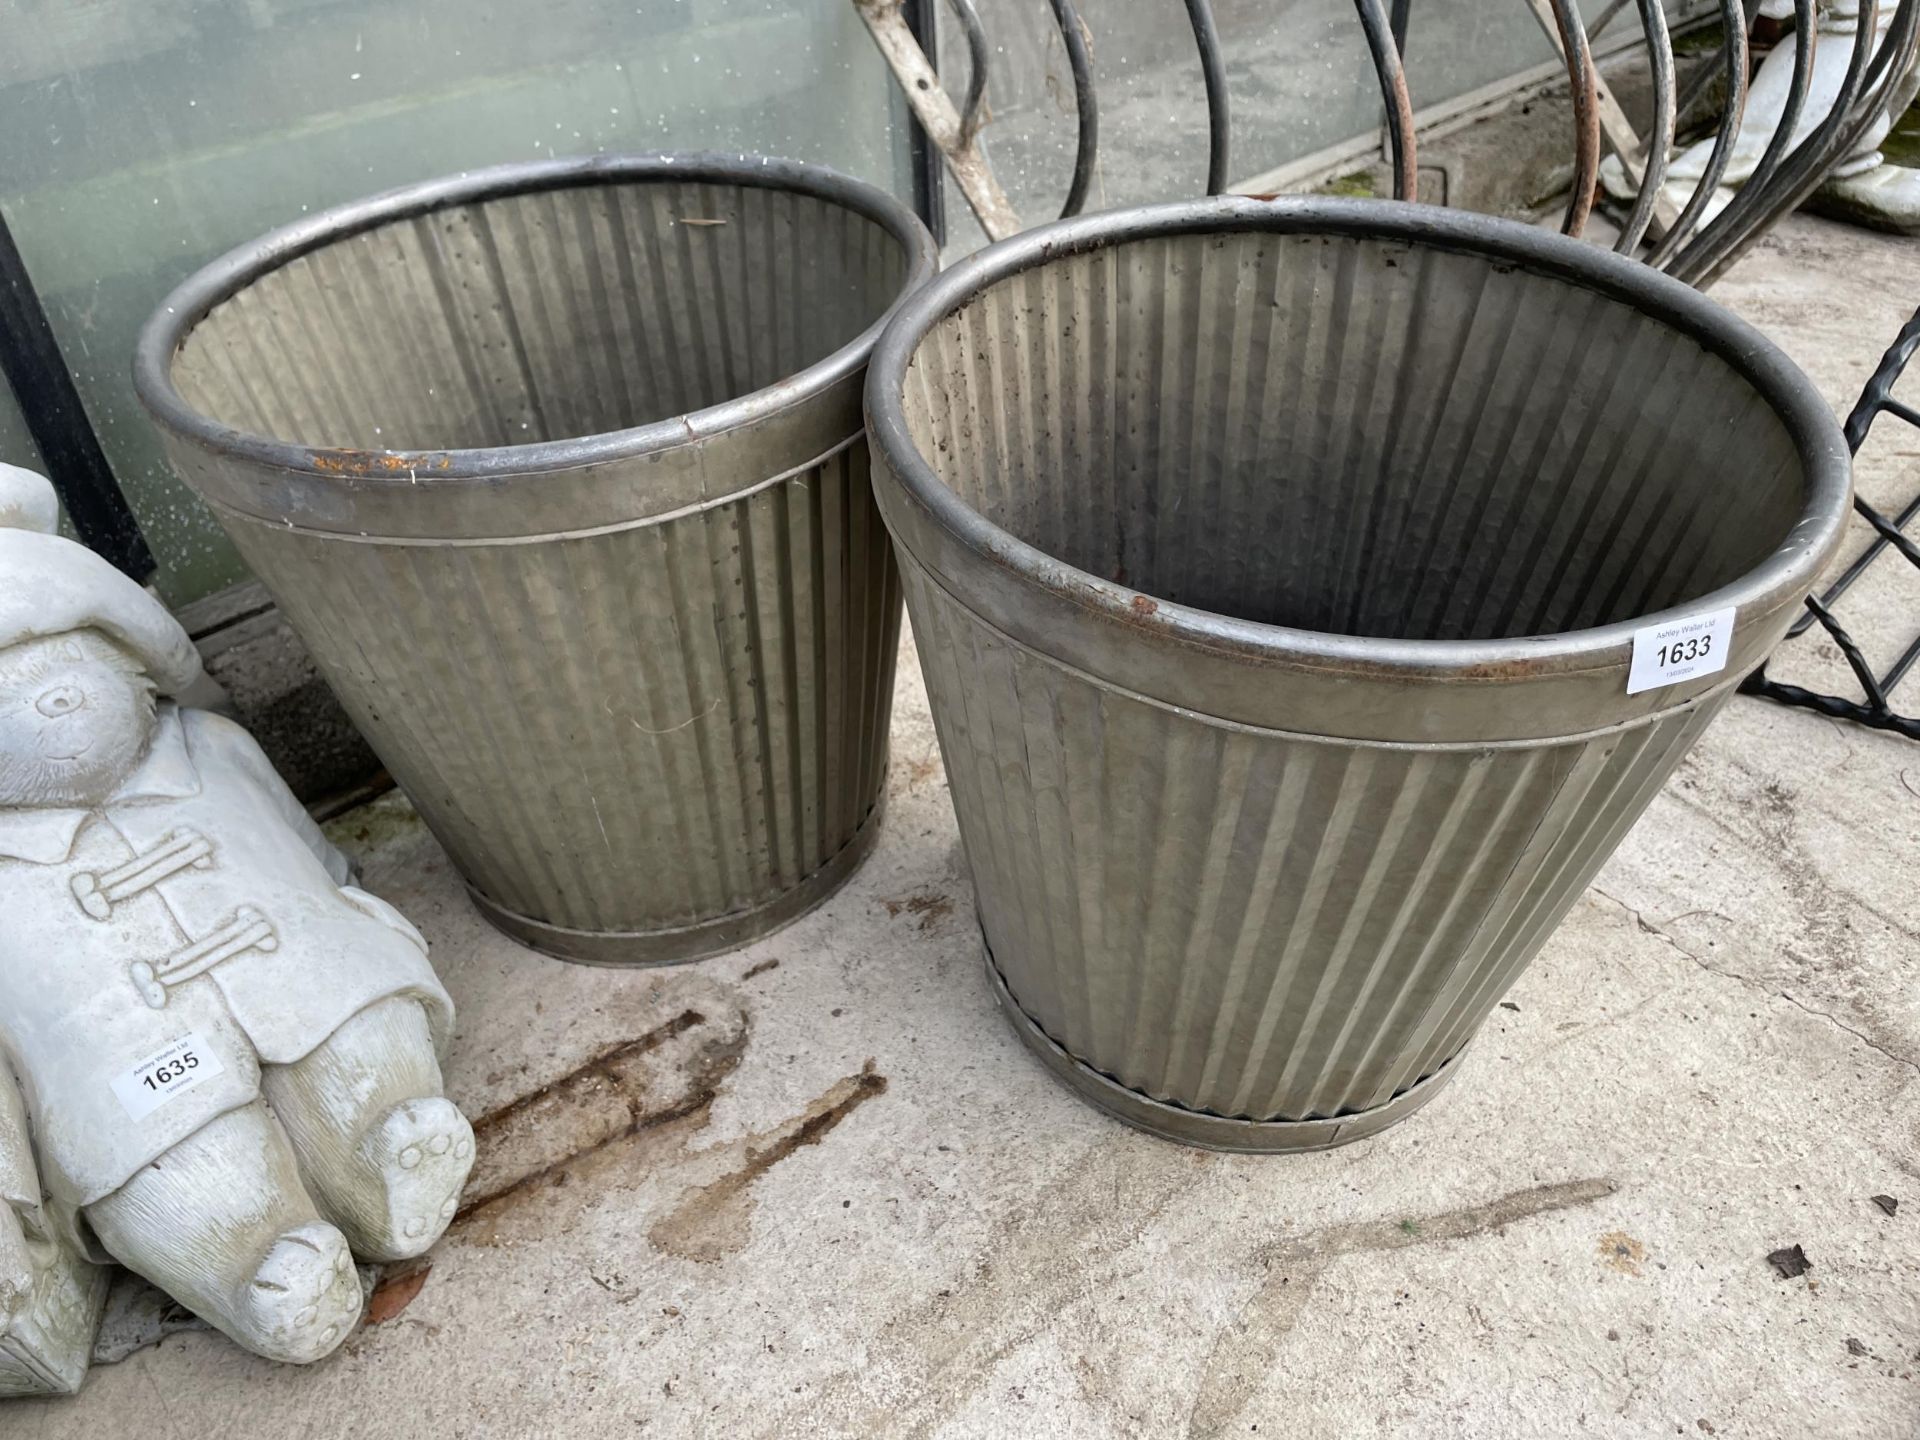 A PAIR OF DOLLY TUB STYLE METAL GARDEN PLANTERS